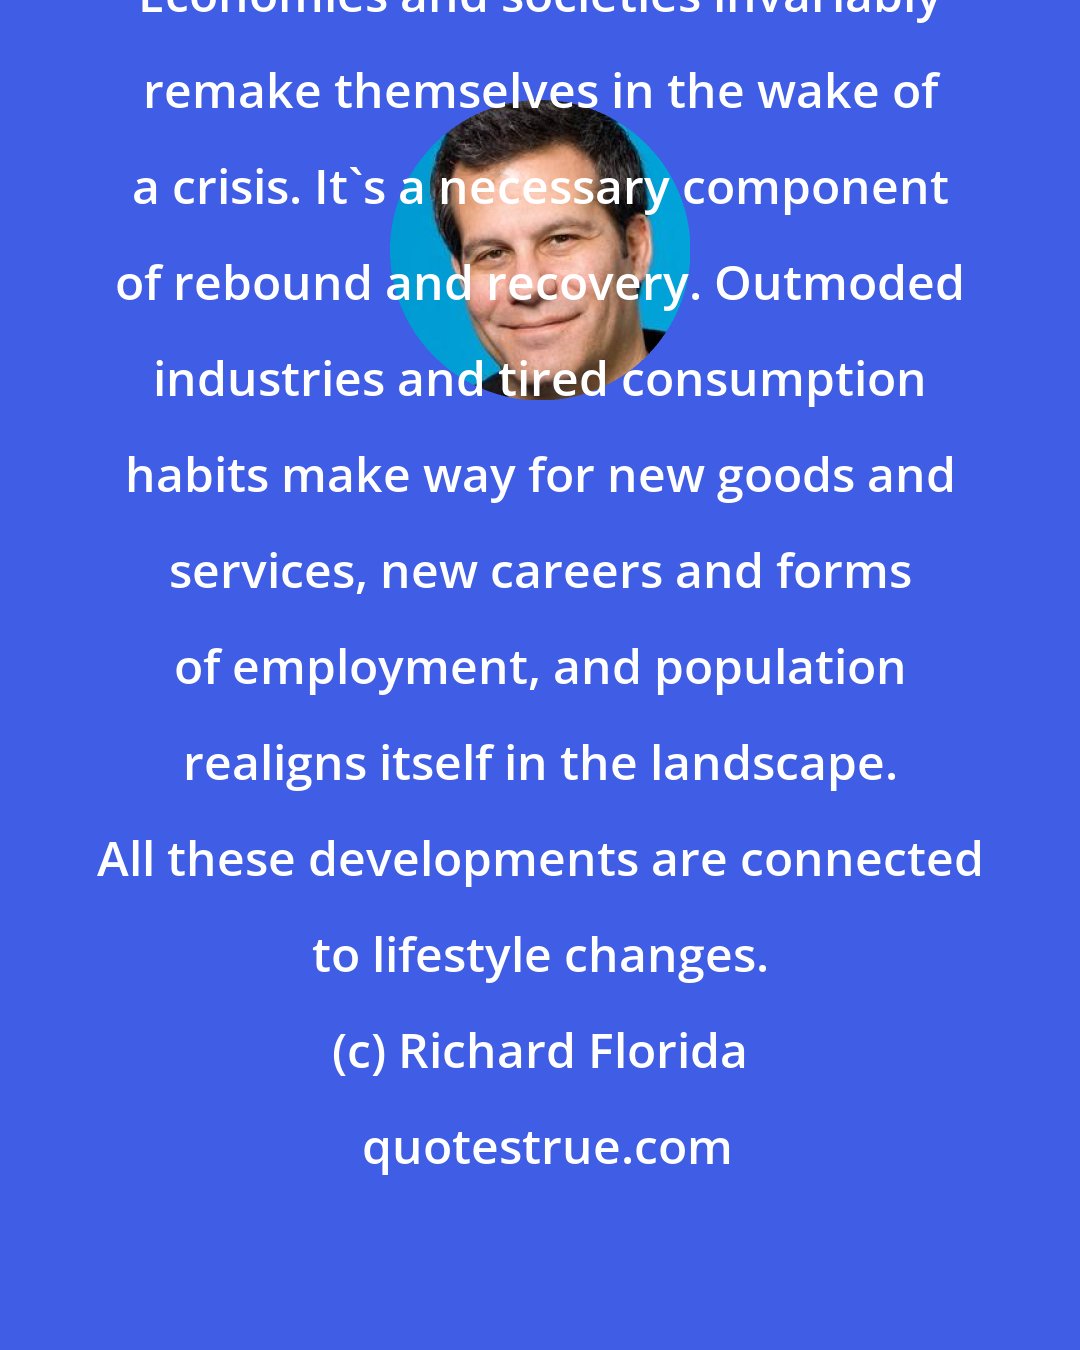 Richard Florida: Economies and societies invariably remake themselves in the wake of a crisis. It's a necessary component of rebound and recovery. Outmoded industries and tired consumption habits make way for new goods and services, new careers and forms of employment, and population realigns itself in the landscape. All these developments are connected to lifestyle changes.